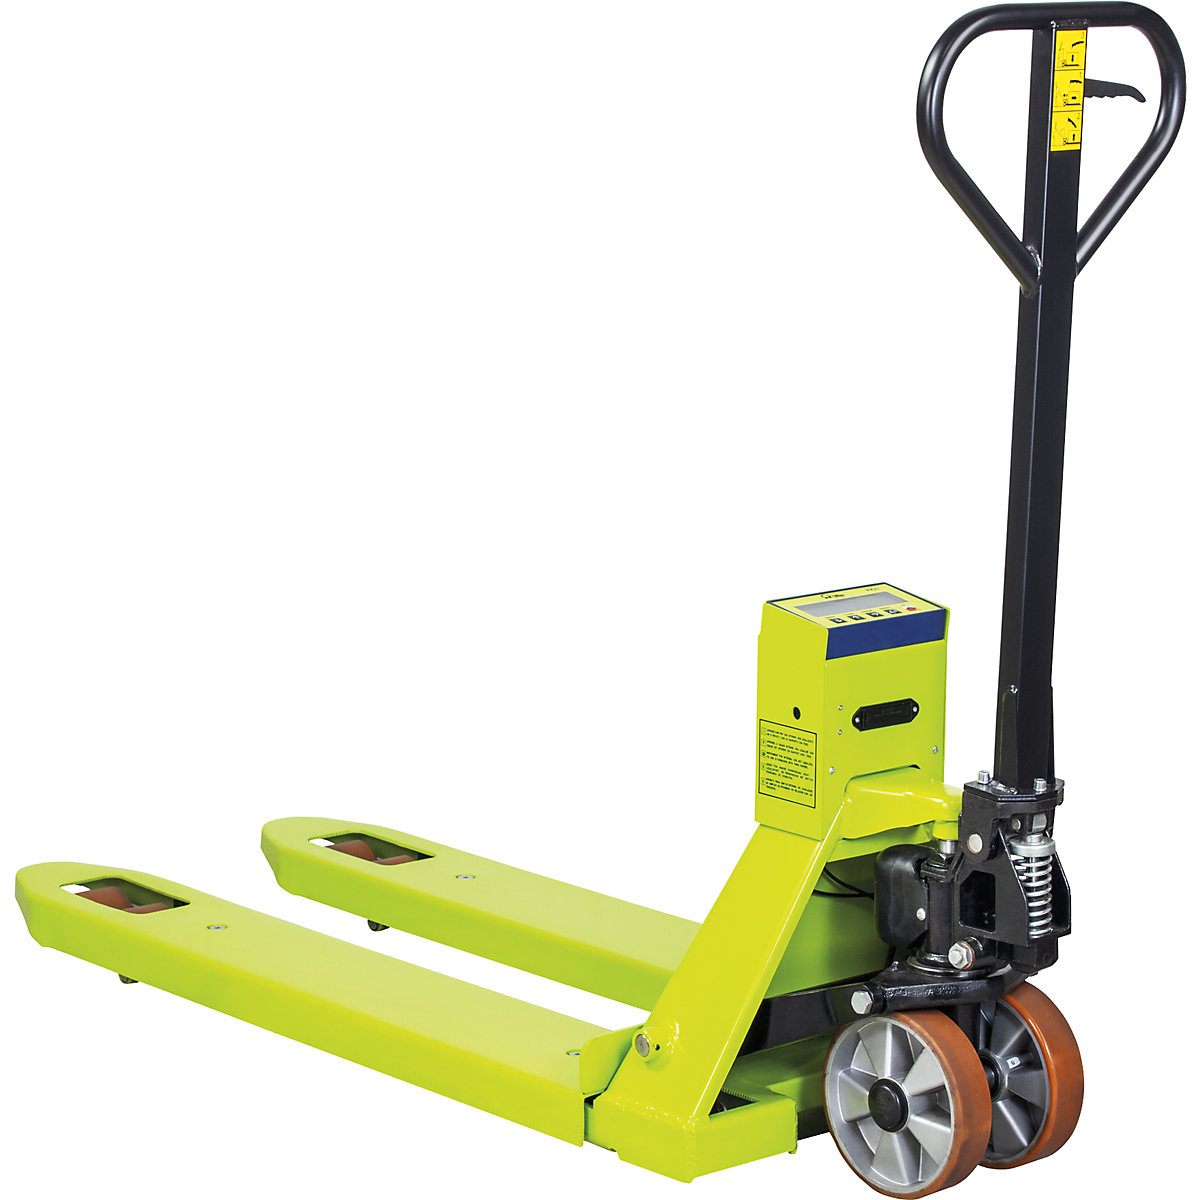 Pallet truck with scales – Pramac, max. load 2500 kg, overall length 1596 mm